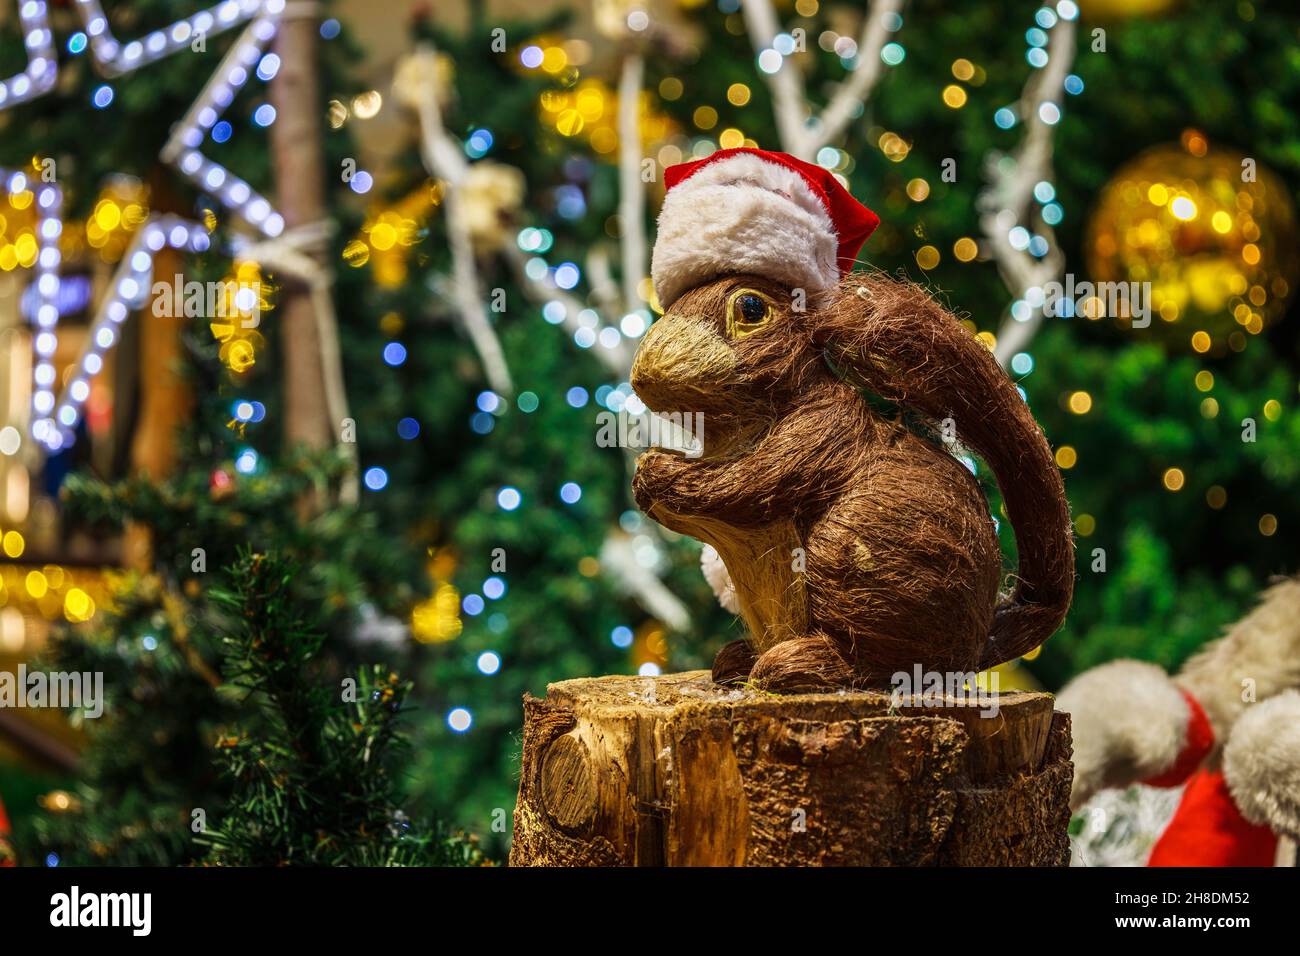 Christmas squirrel on blurry Christmas tree decoration background Stock Photo